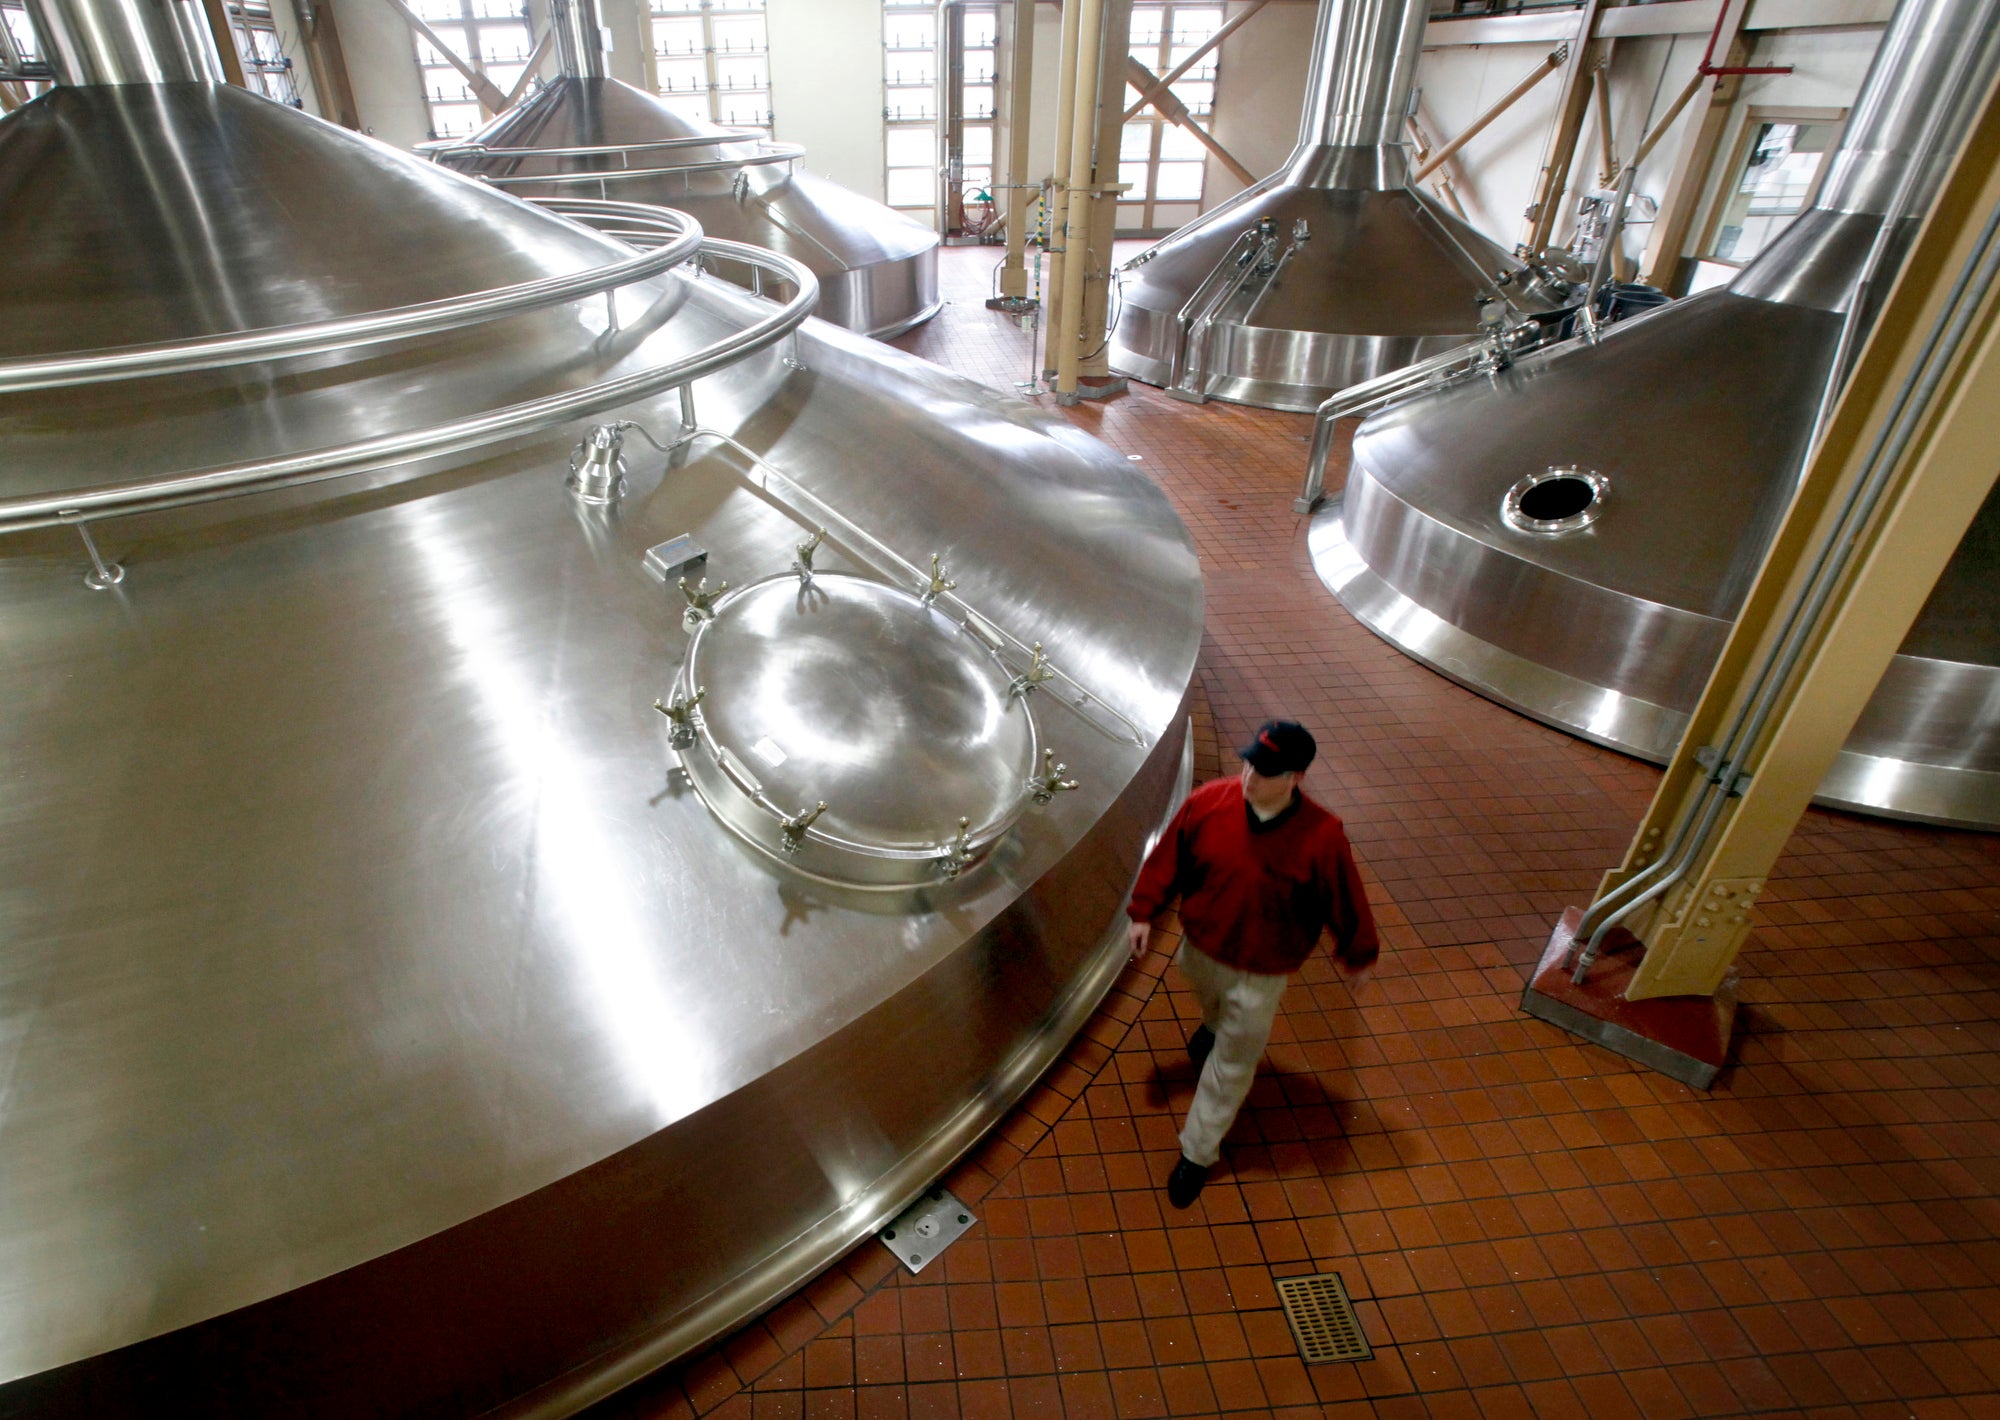 overhead view of very large stainless steel tanks sticking out of the floor.